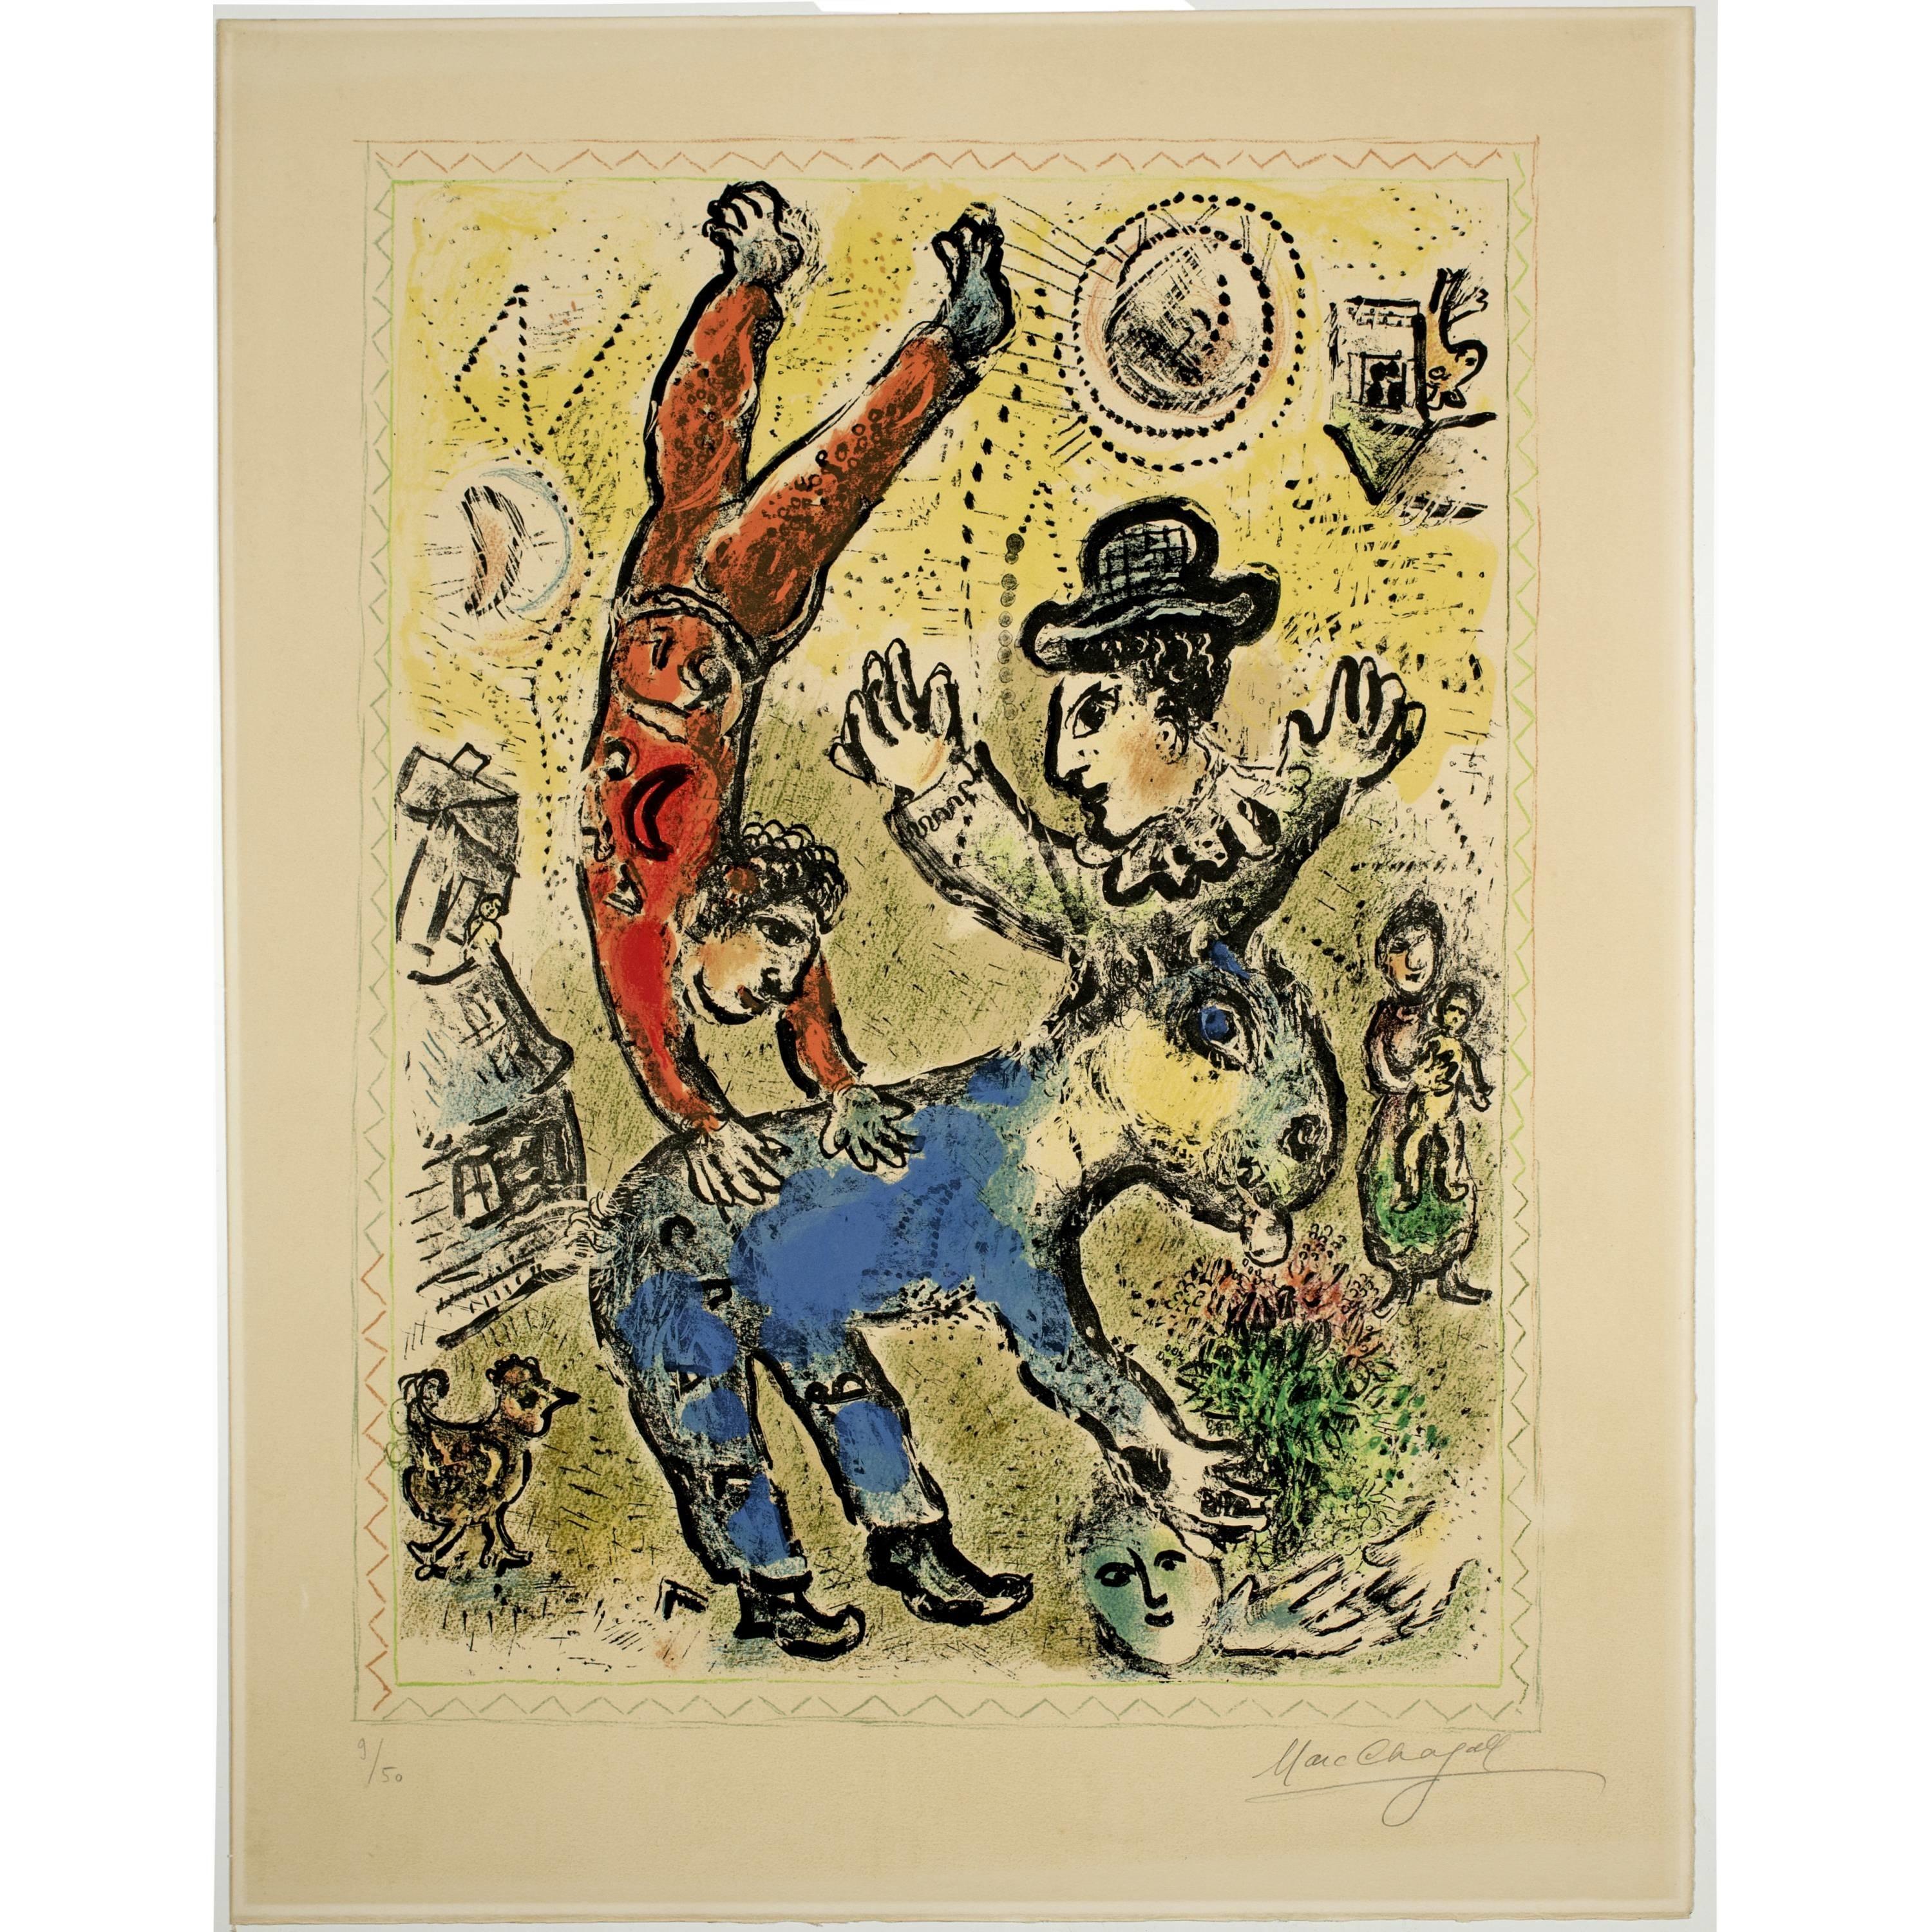  MARC CHAGALL 1887 - 1985 
L'acrobate rouge
1974
Colour lithograph
69x51.5 cm, image; 83x64 cm, sheet size
Signed by the artist in pencil lower right 